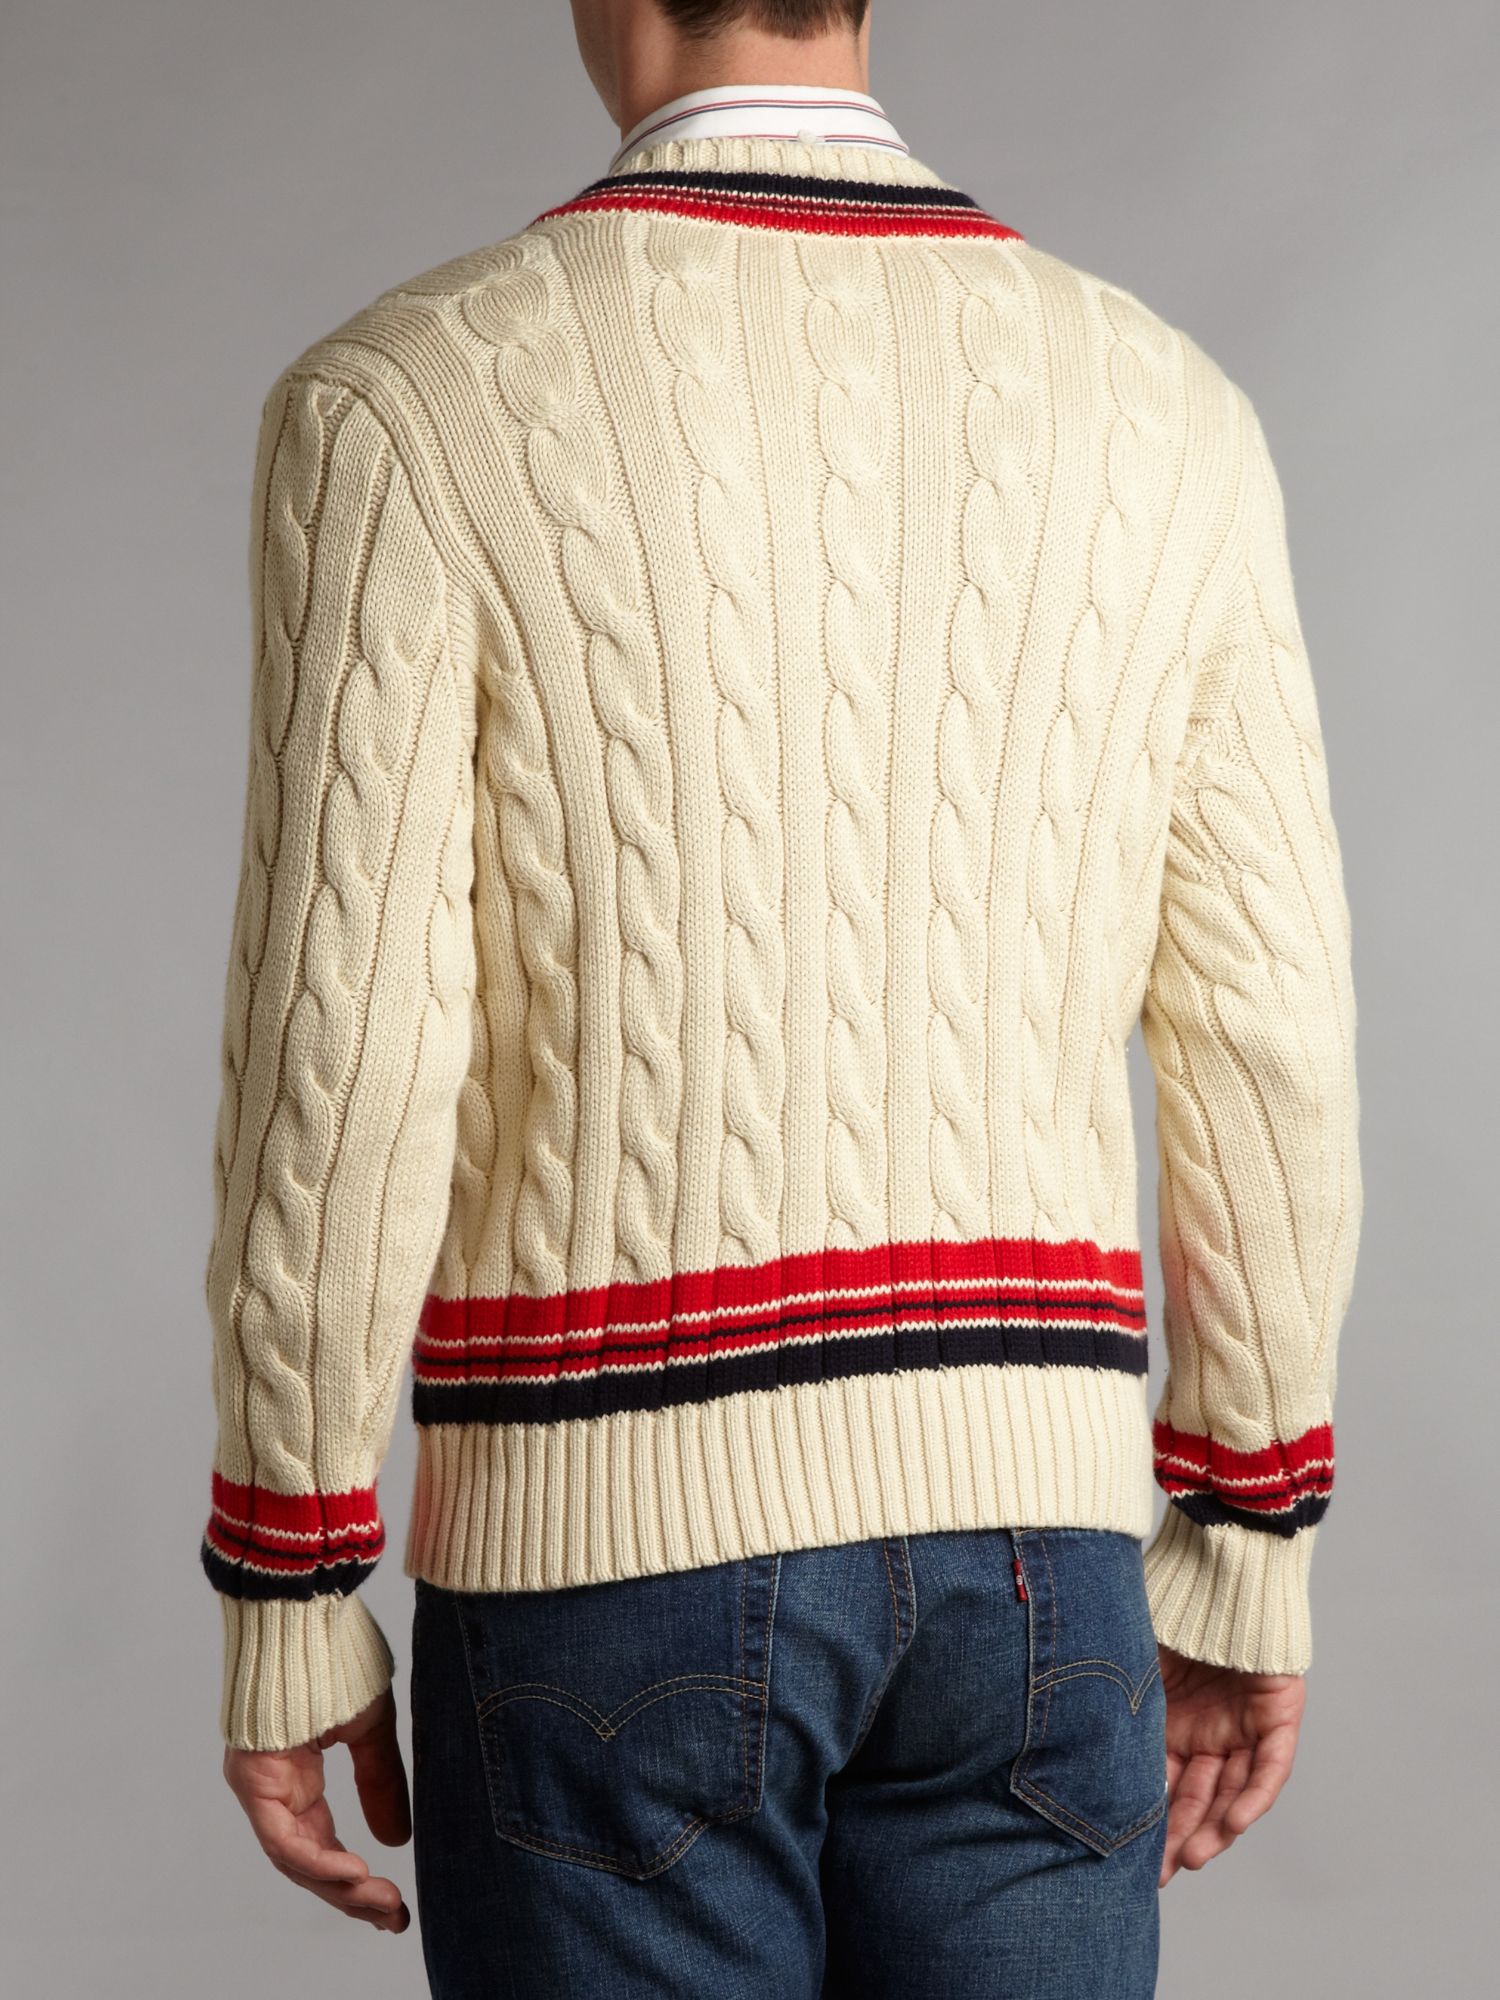 Polo ralph lauren Vneck Cable Knitted Cricket Jumper in Natural for Men ...